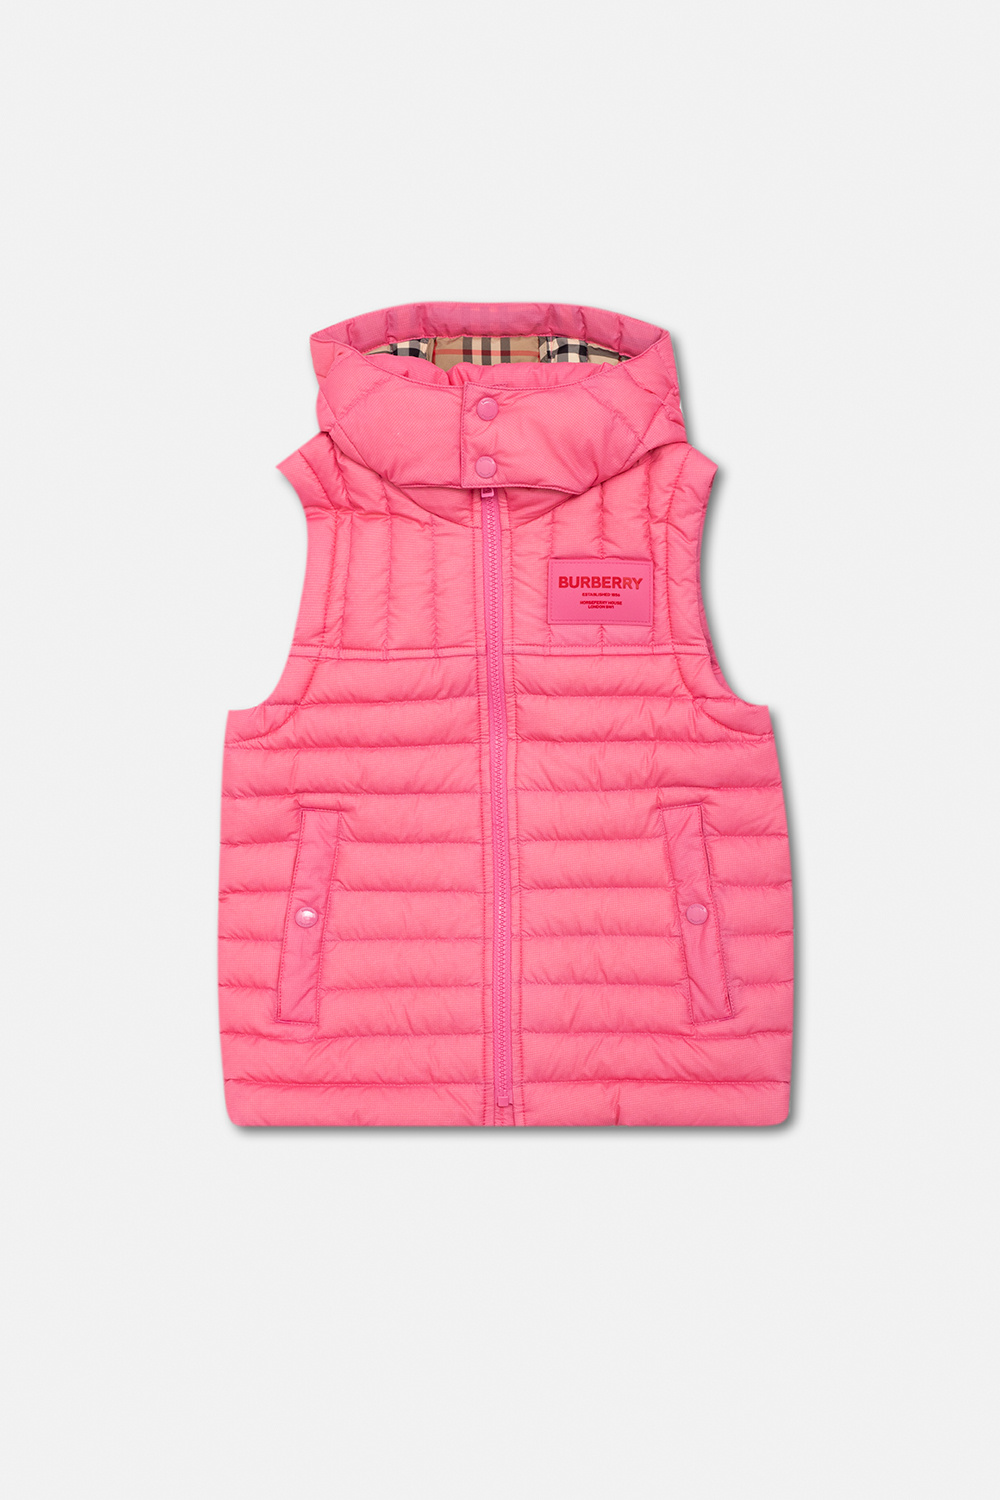 StclaircomoShops - burberry reversible vintage check car coat item |  Burberry Kids Quilted vest | 14 years) | Kids's Girls clothes (4